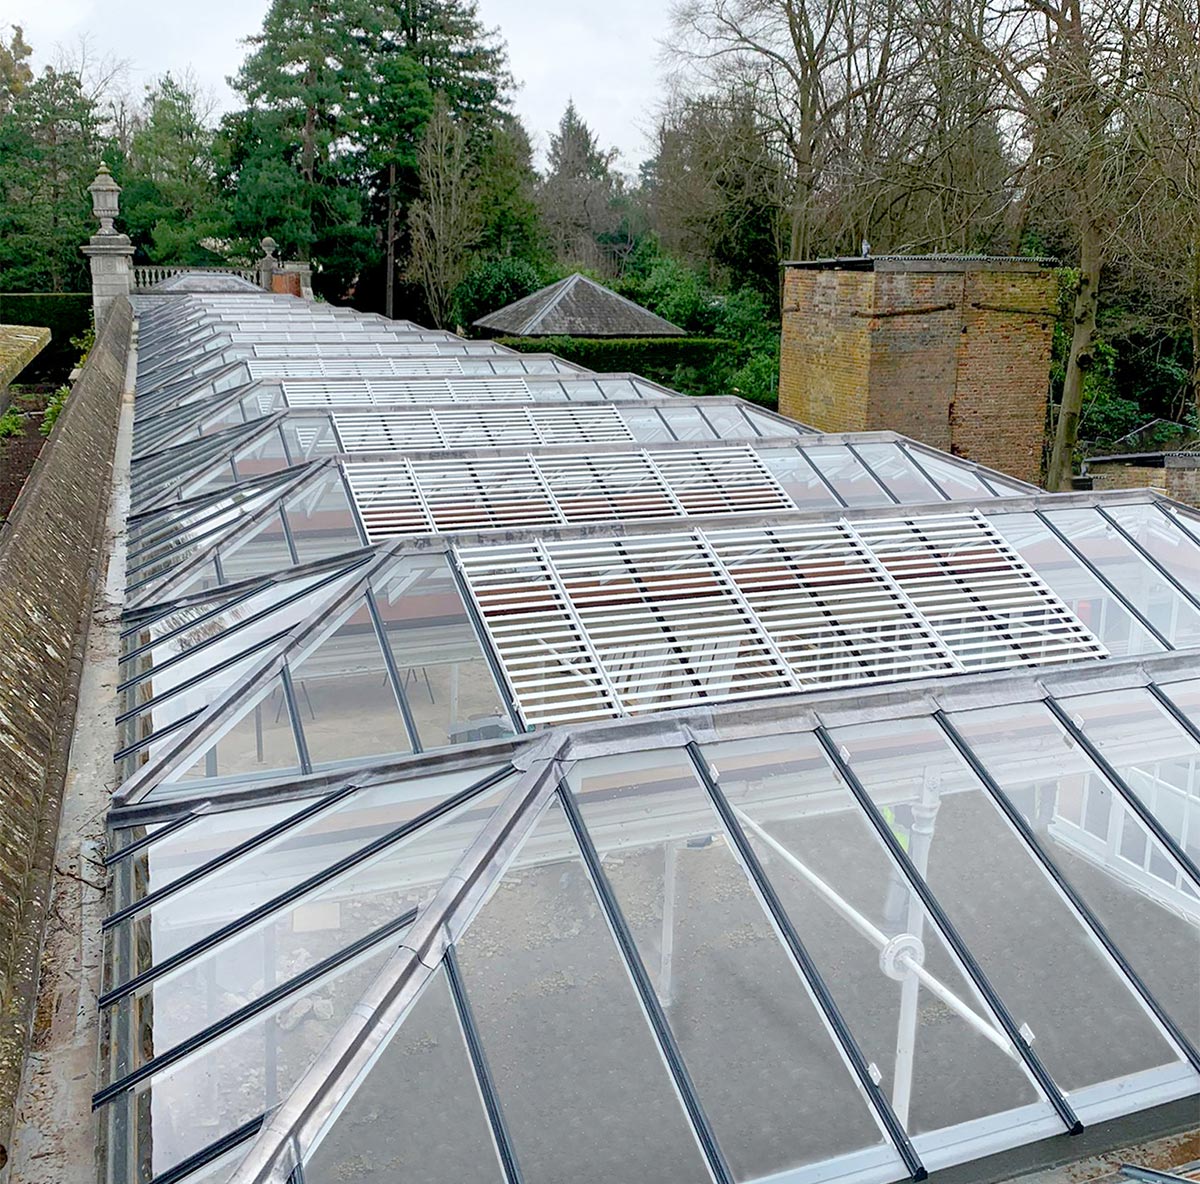 Example of an orangery with a glazed roof